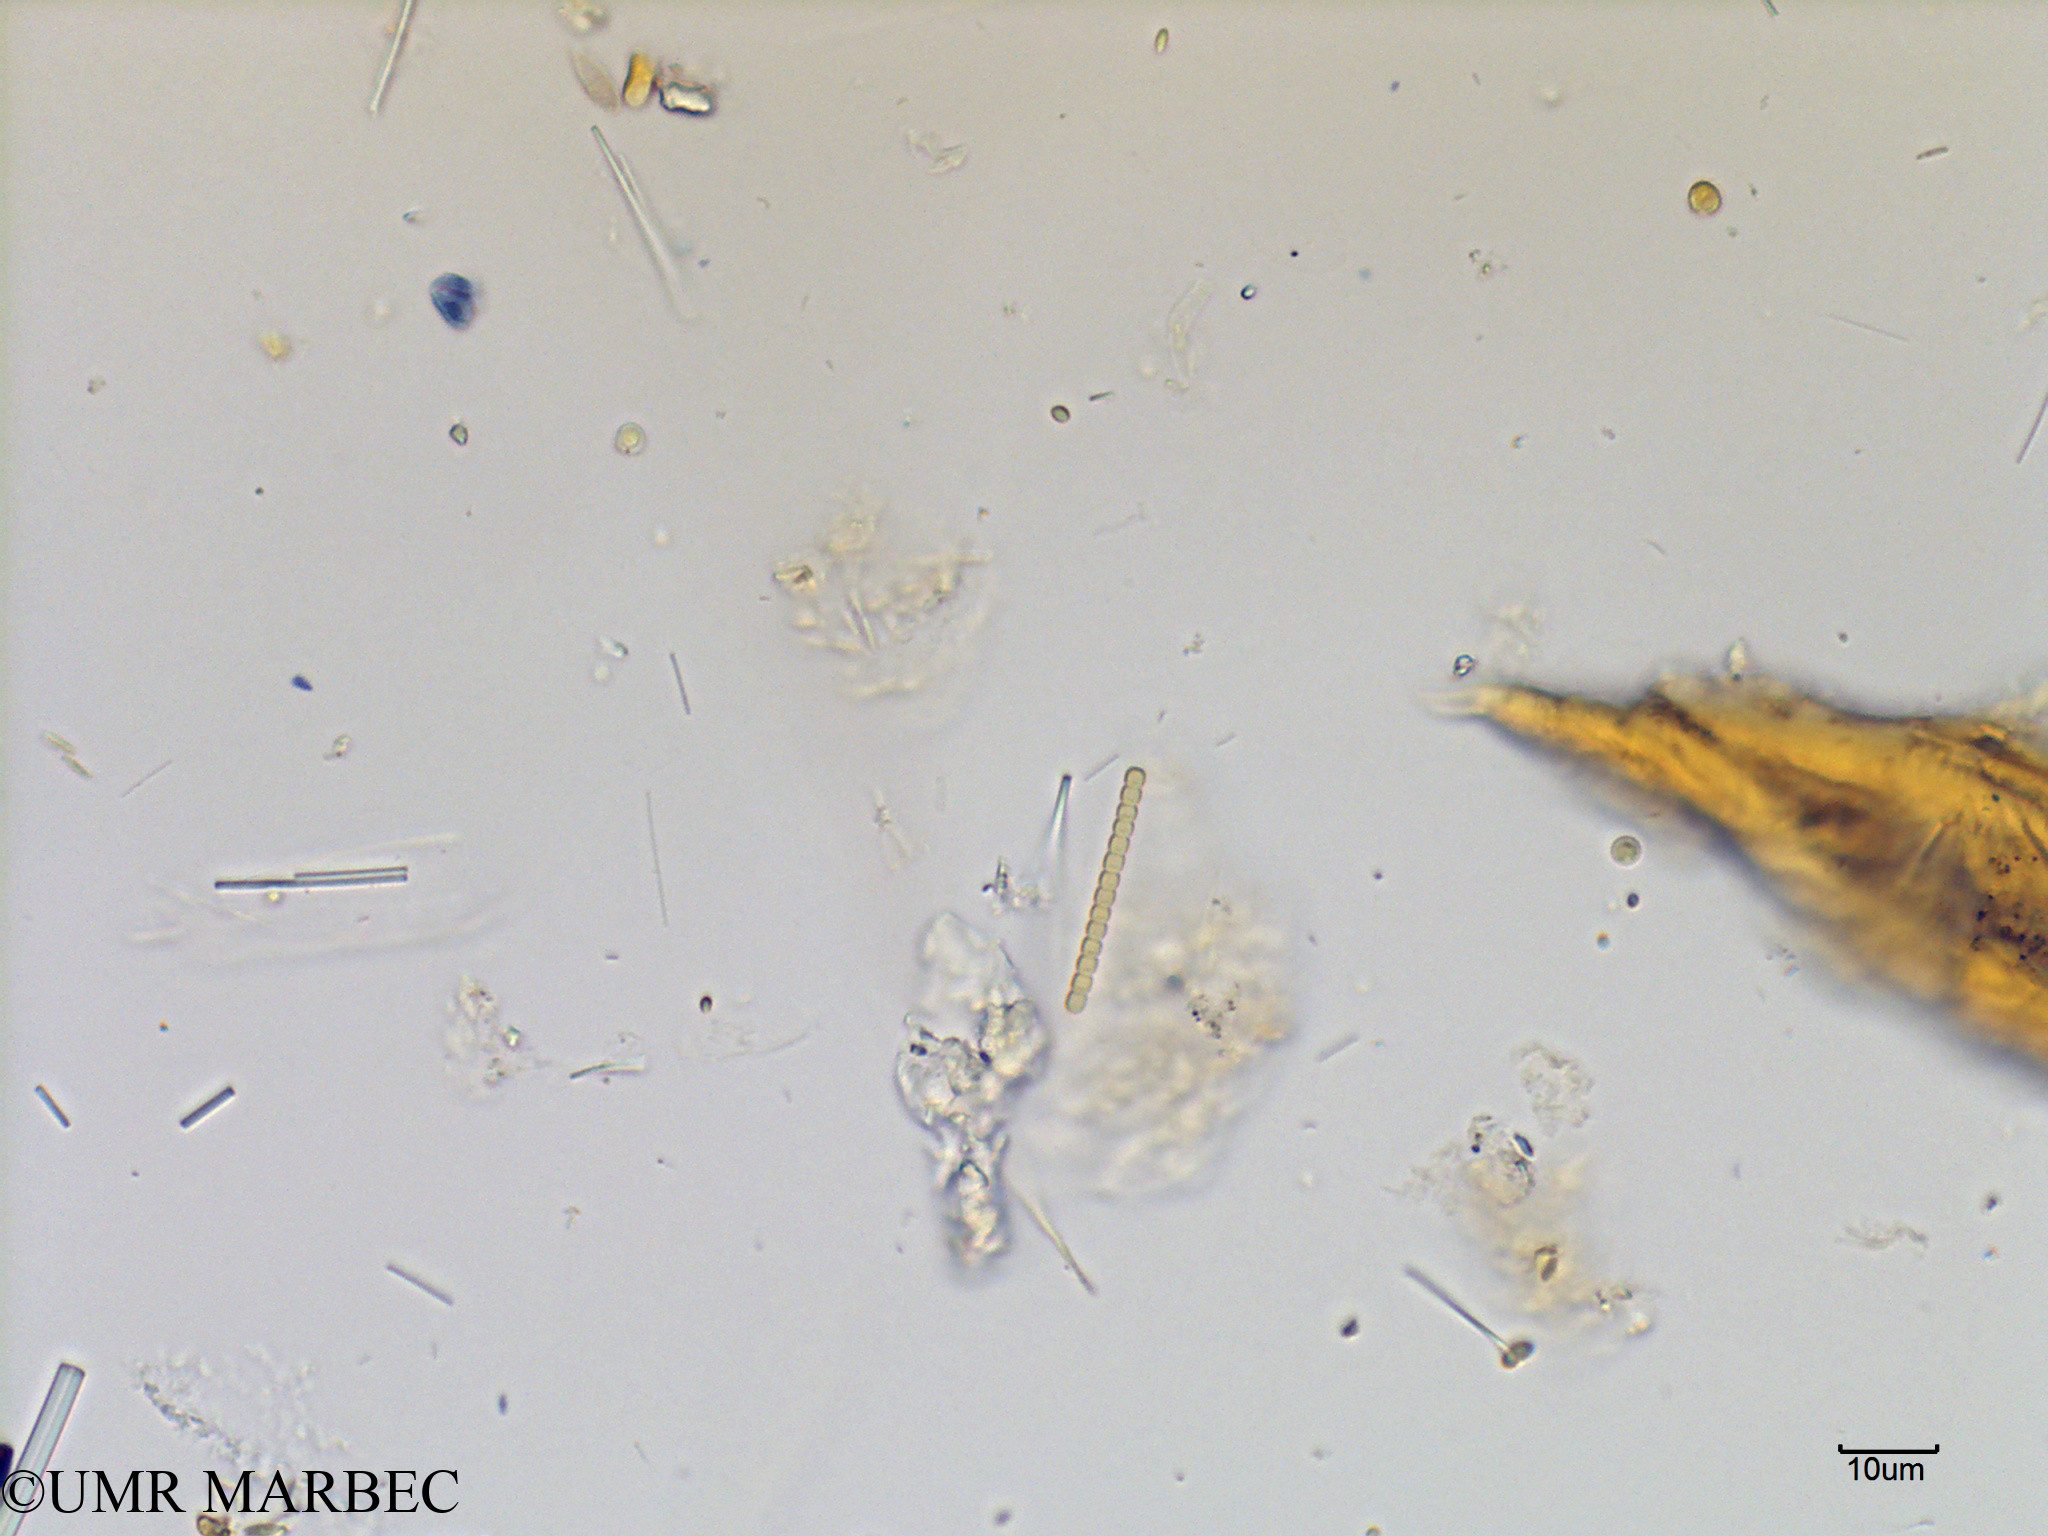 phyto/Scattered_Islands/mayotte_lagoon/SIREME May 2016/Oscillatoriale spp (MAY7_cyano petite).tif(copy).jpg